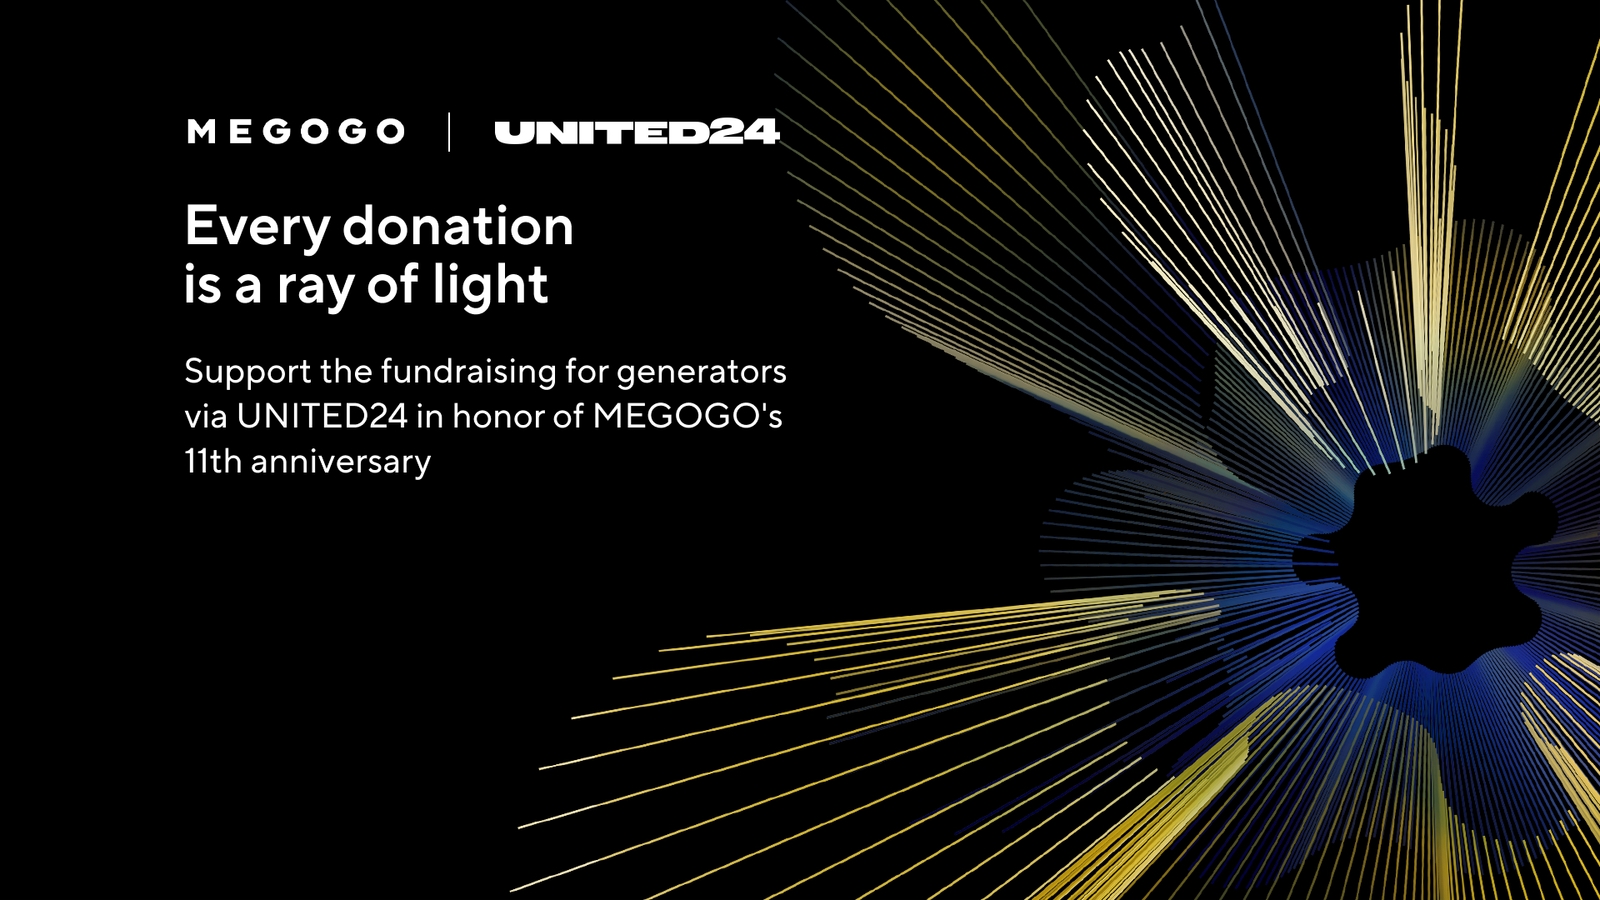 MEGOGO Partners with UNITED24, Launching a Fundraiser for Generators